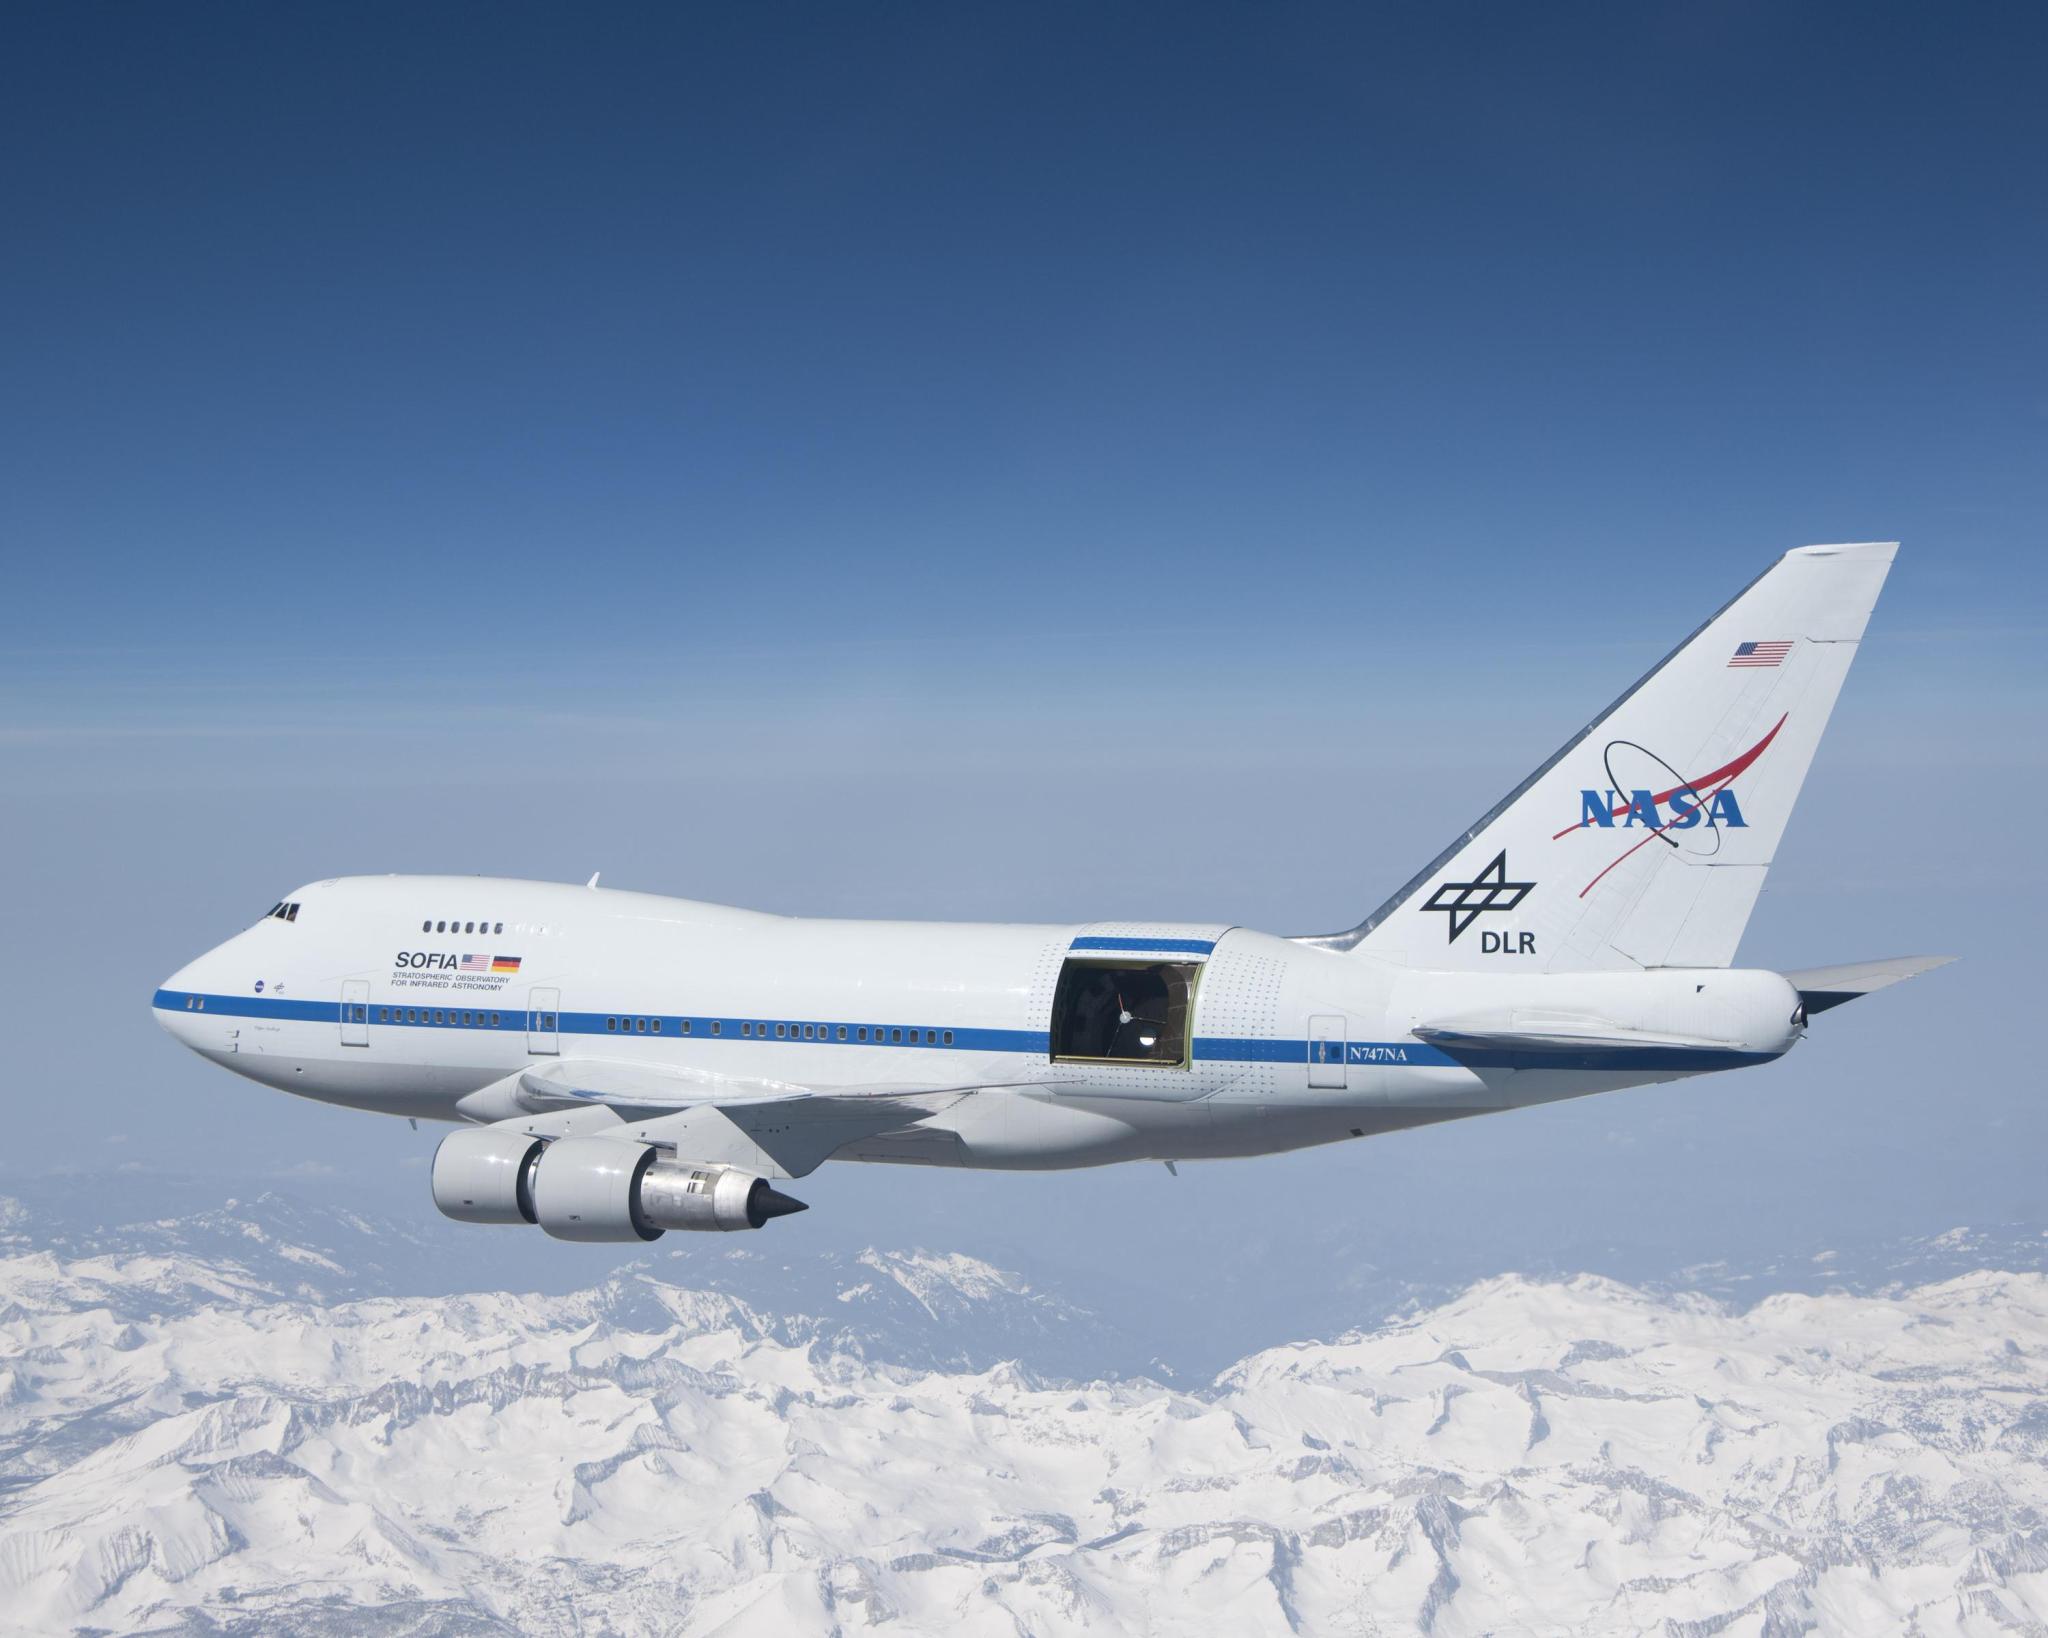 A white airplane floats over snowy mountains. The airplane has NASA insignia and a large opening on its side, where a telescope tool looks outward. 